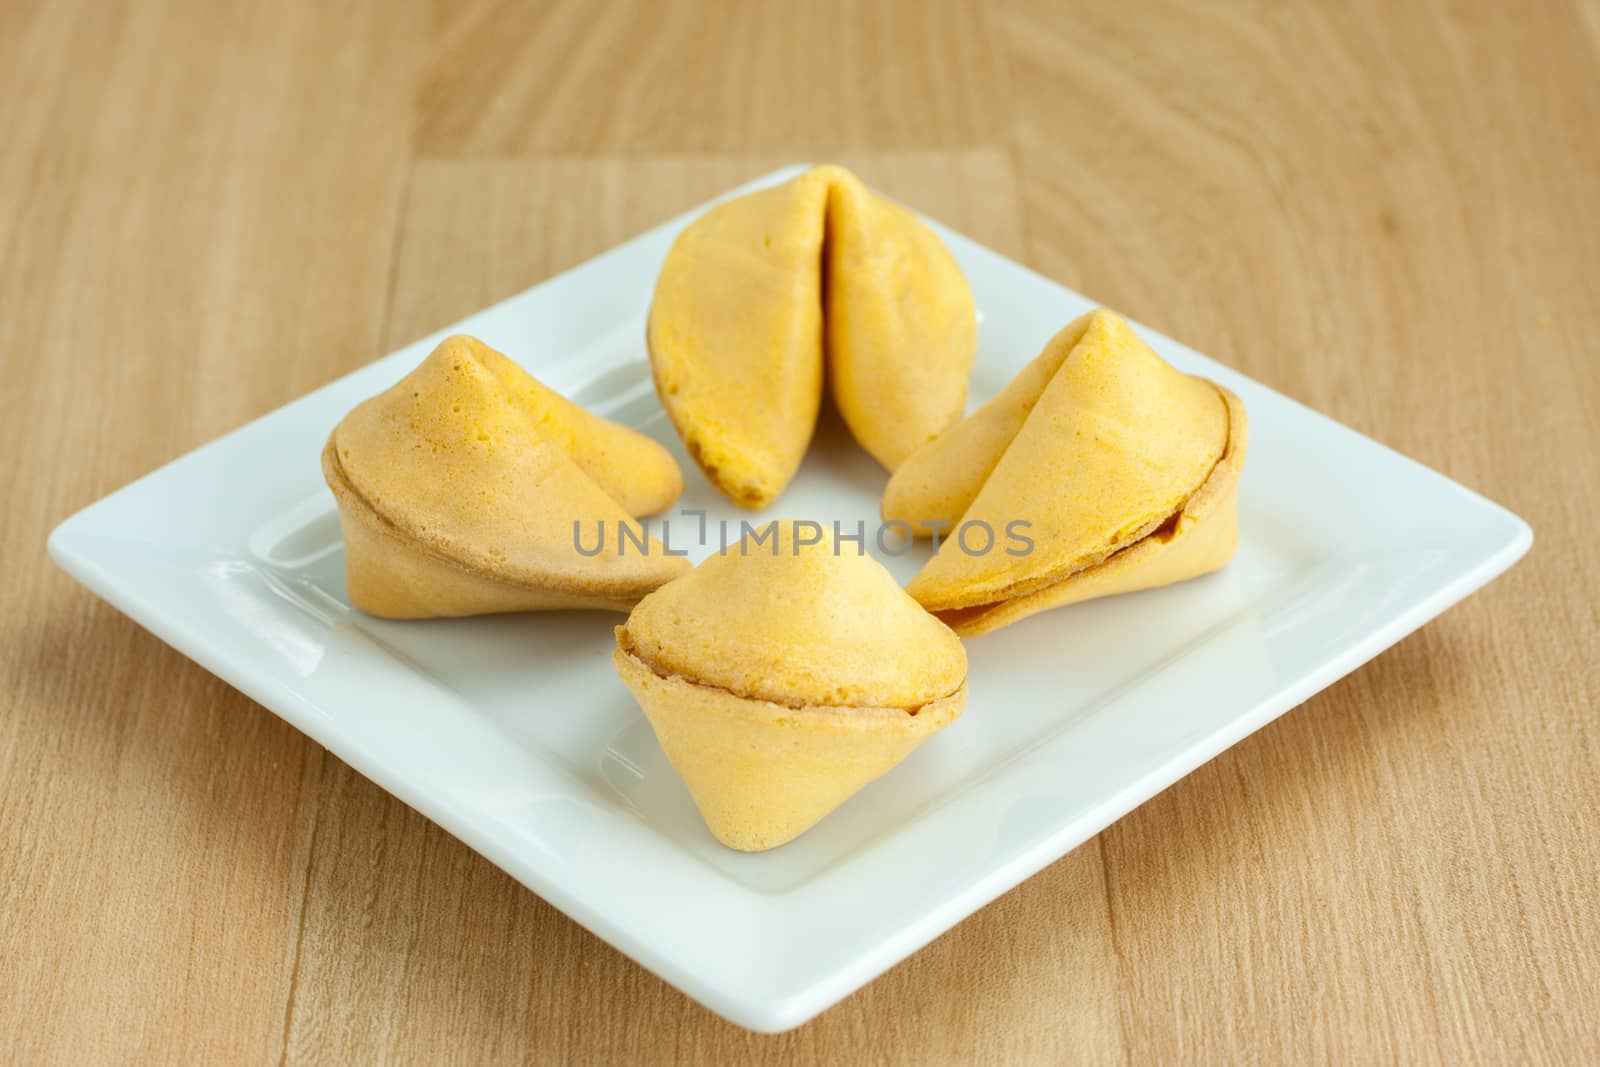 Four fortune cookies on a square white plate and sitting on a wooden table.